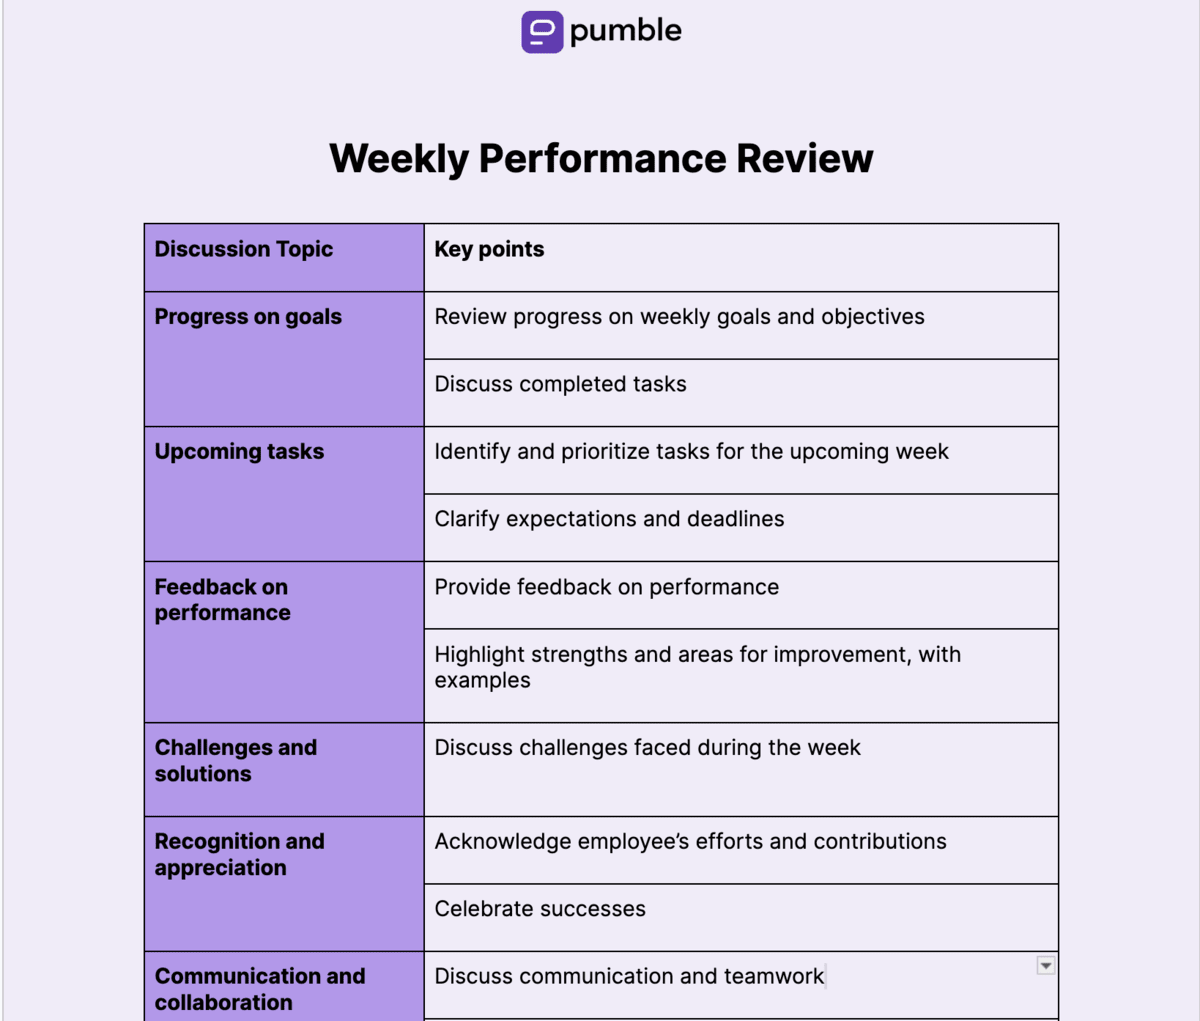 Weekly performance review